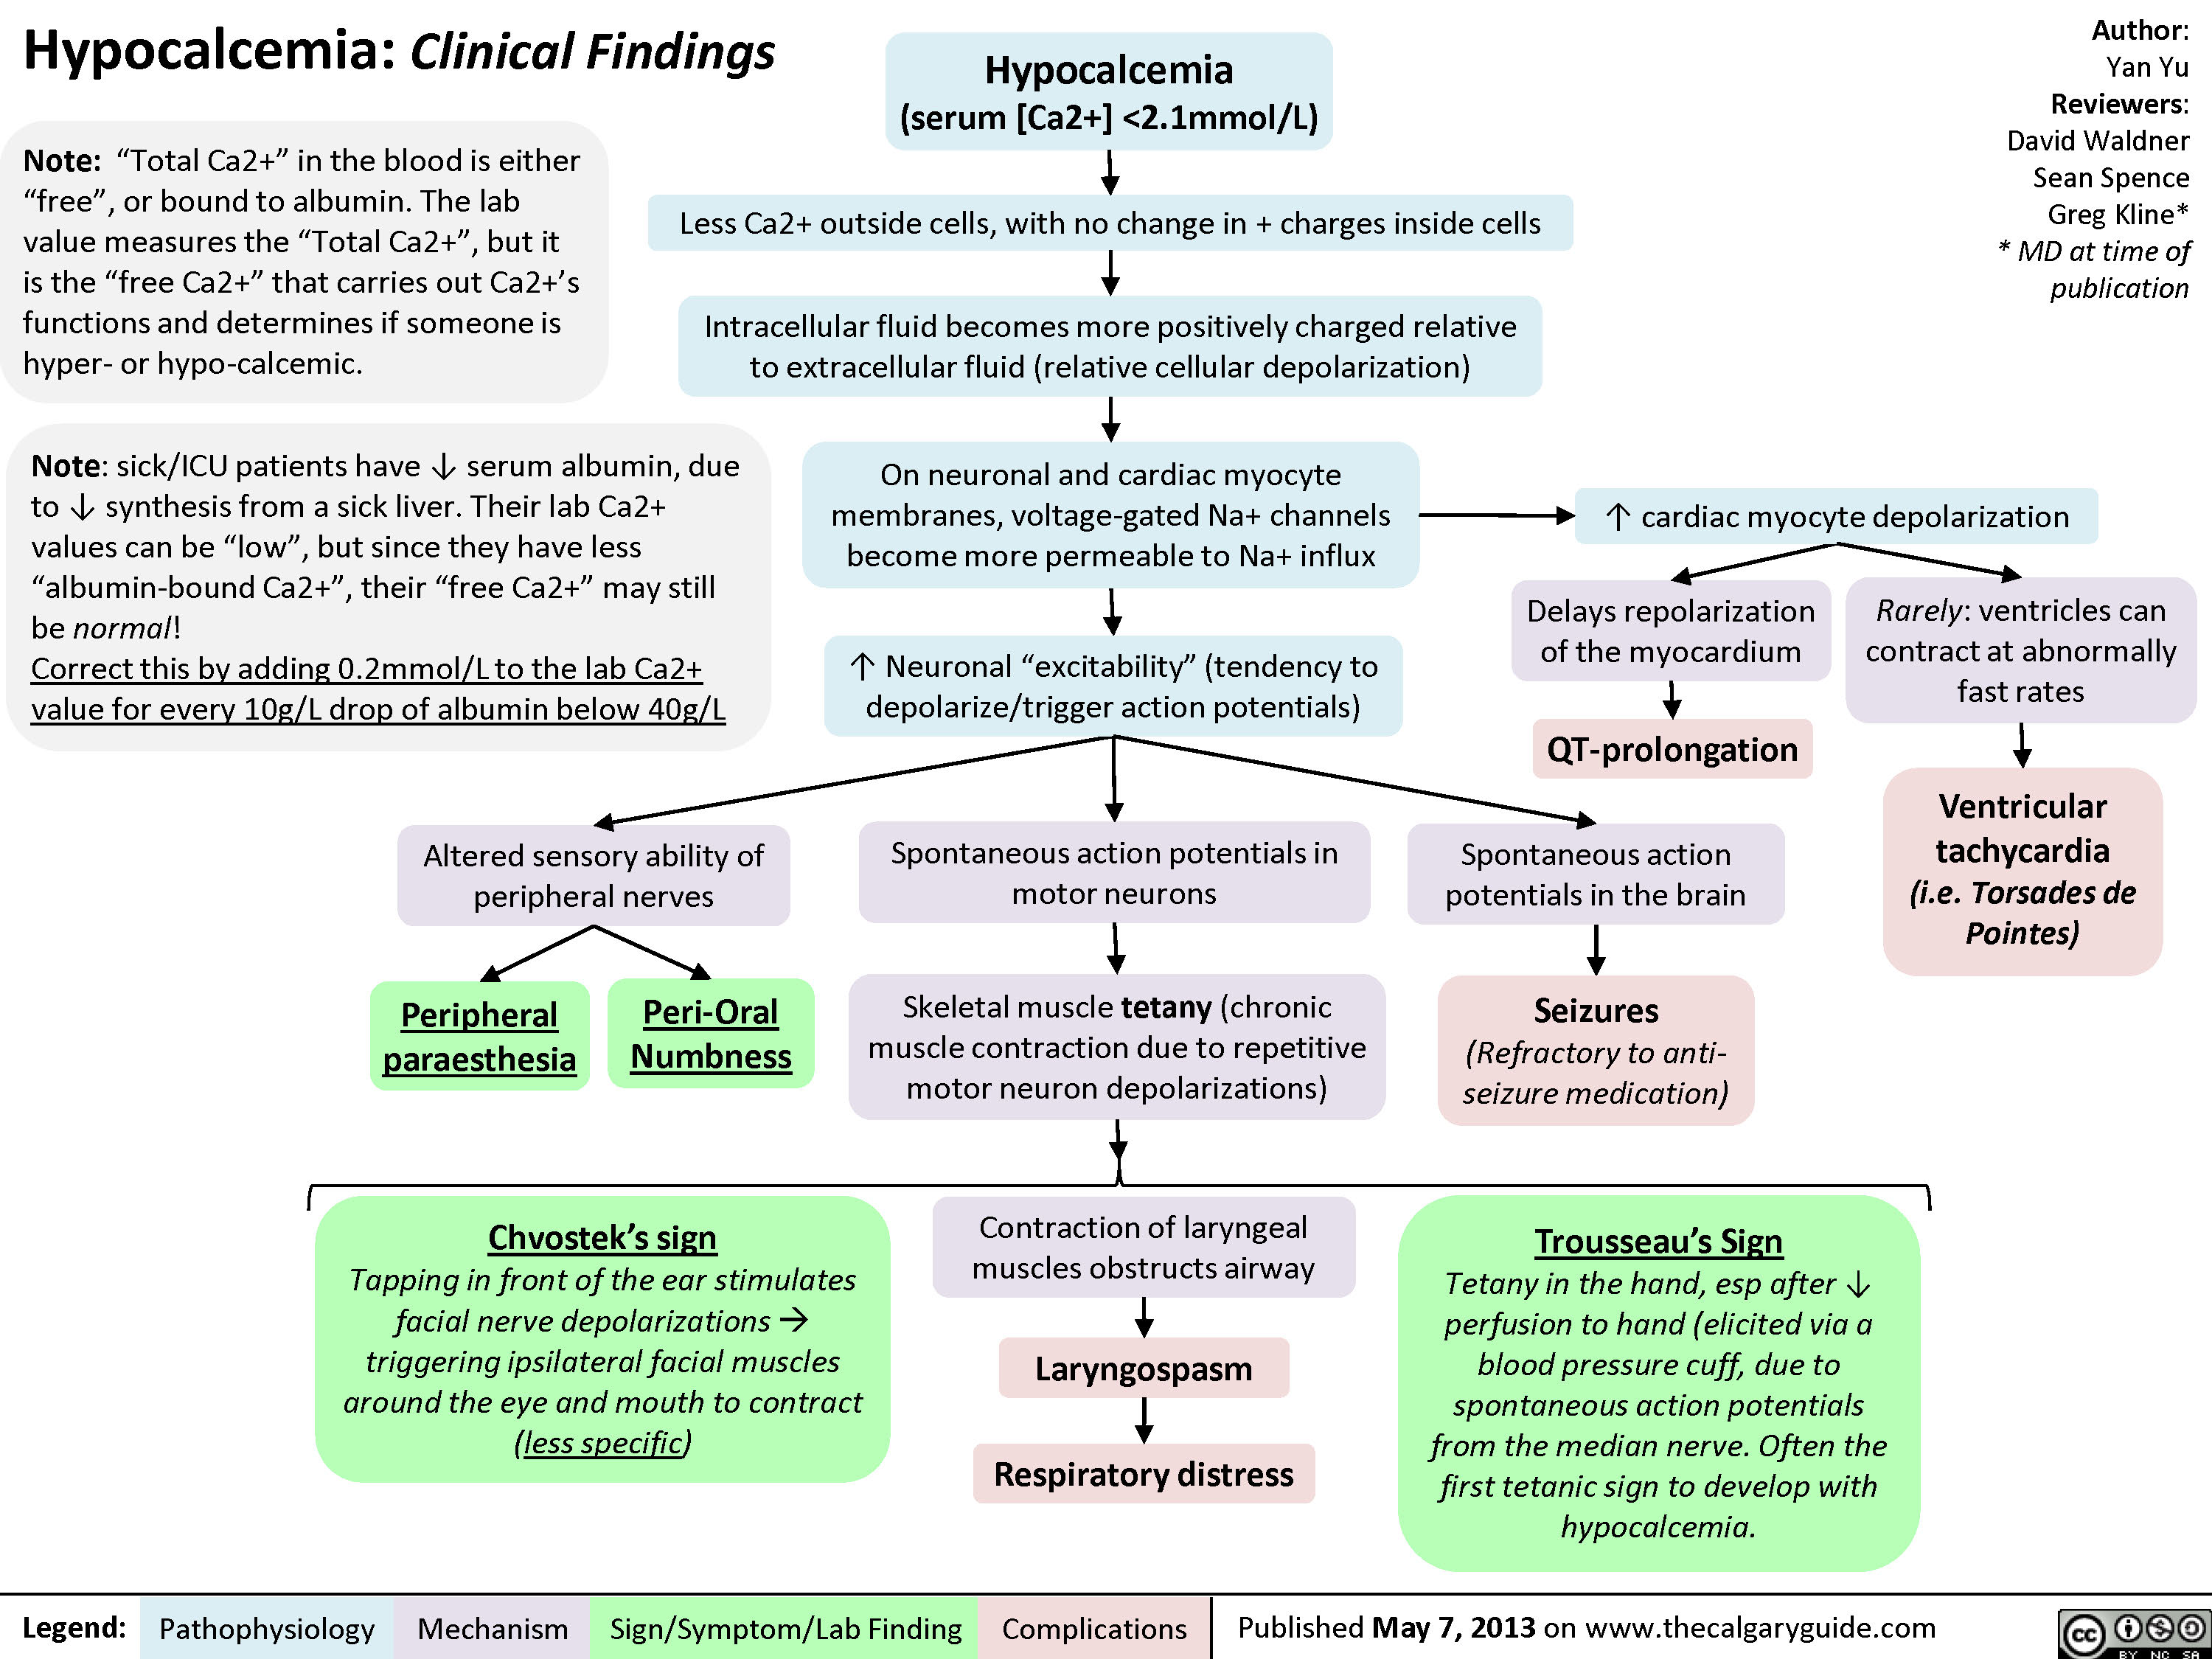 Hypocalcemia - Clinical Findings